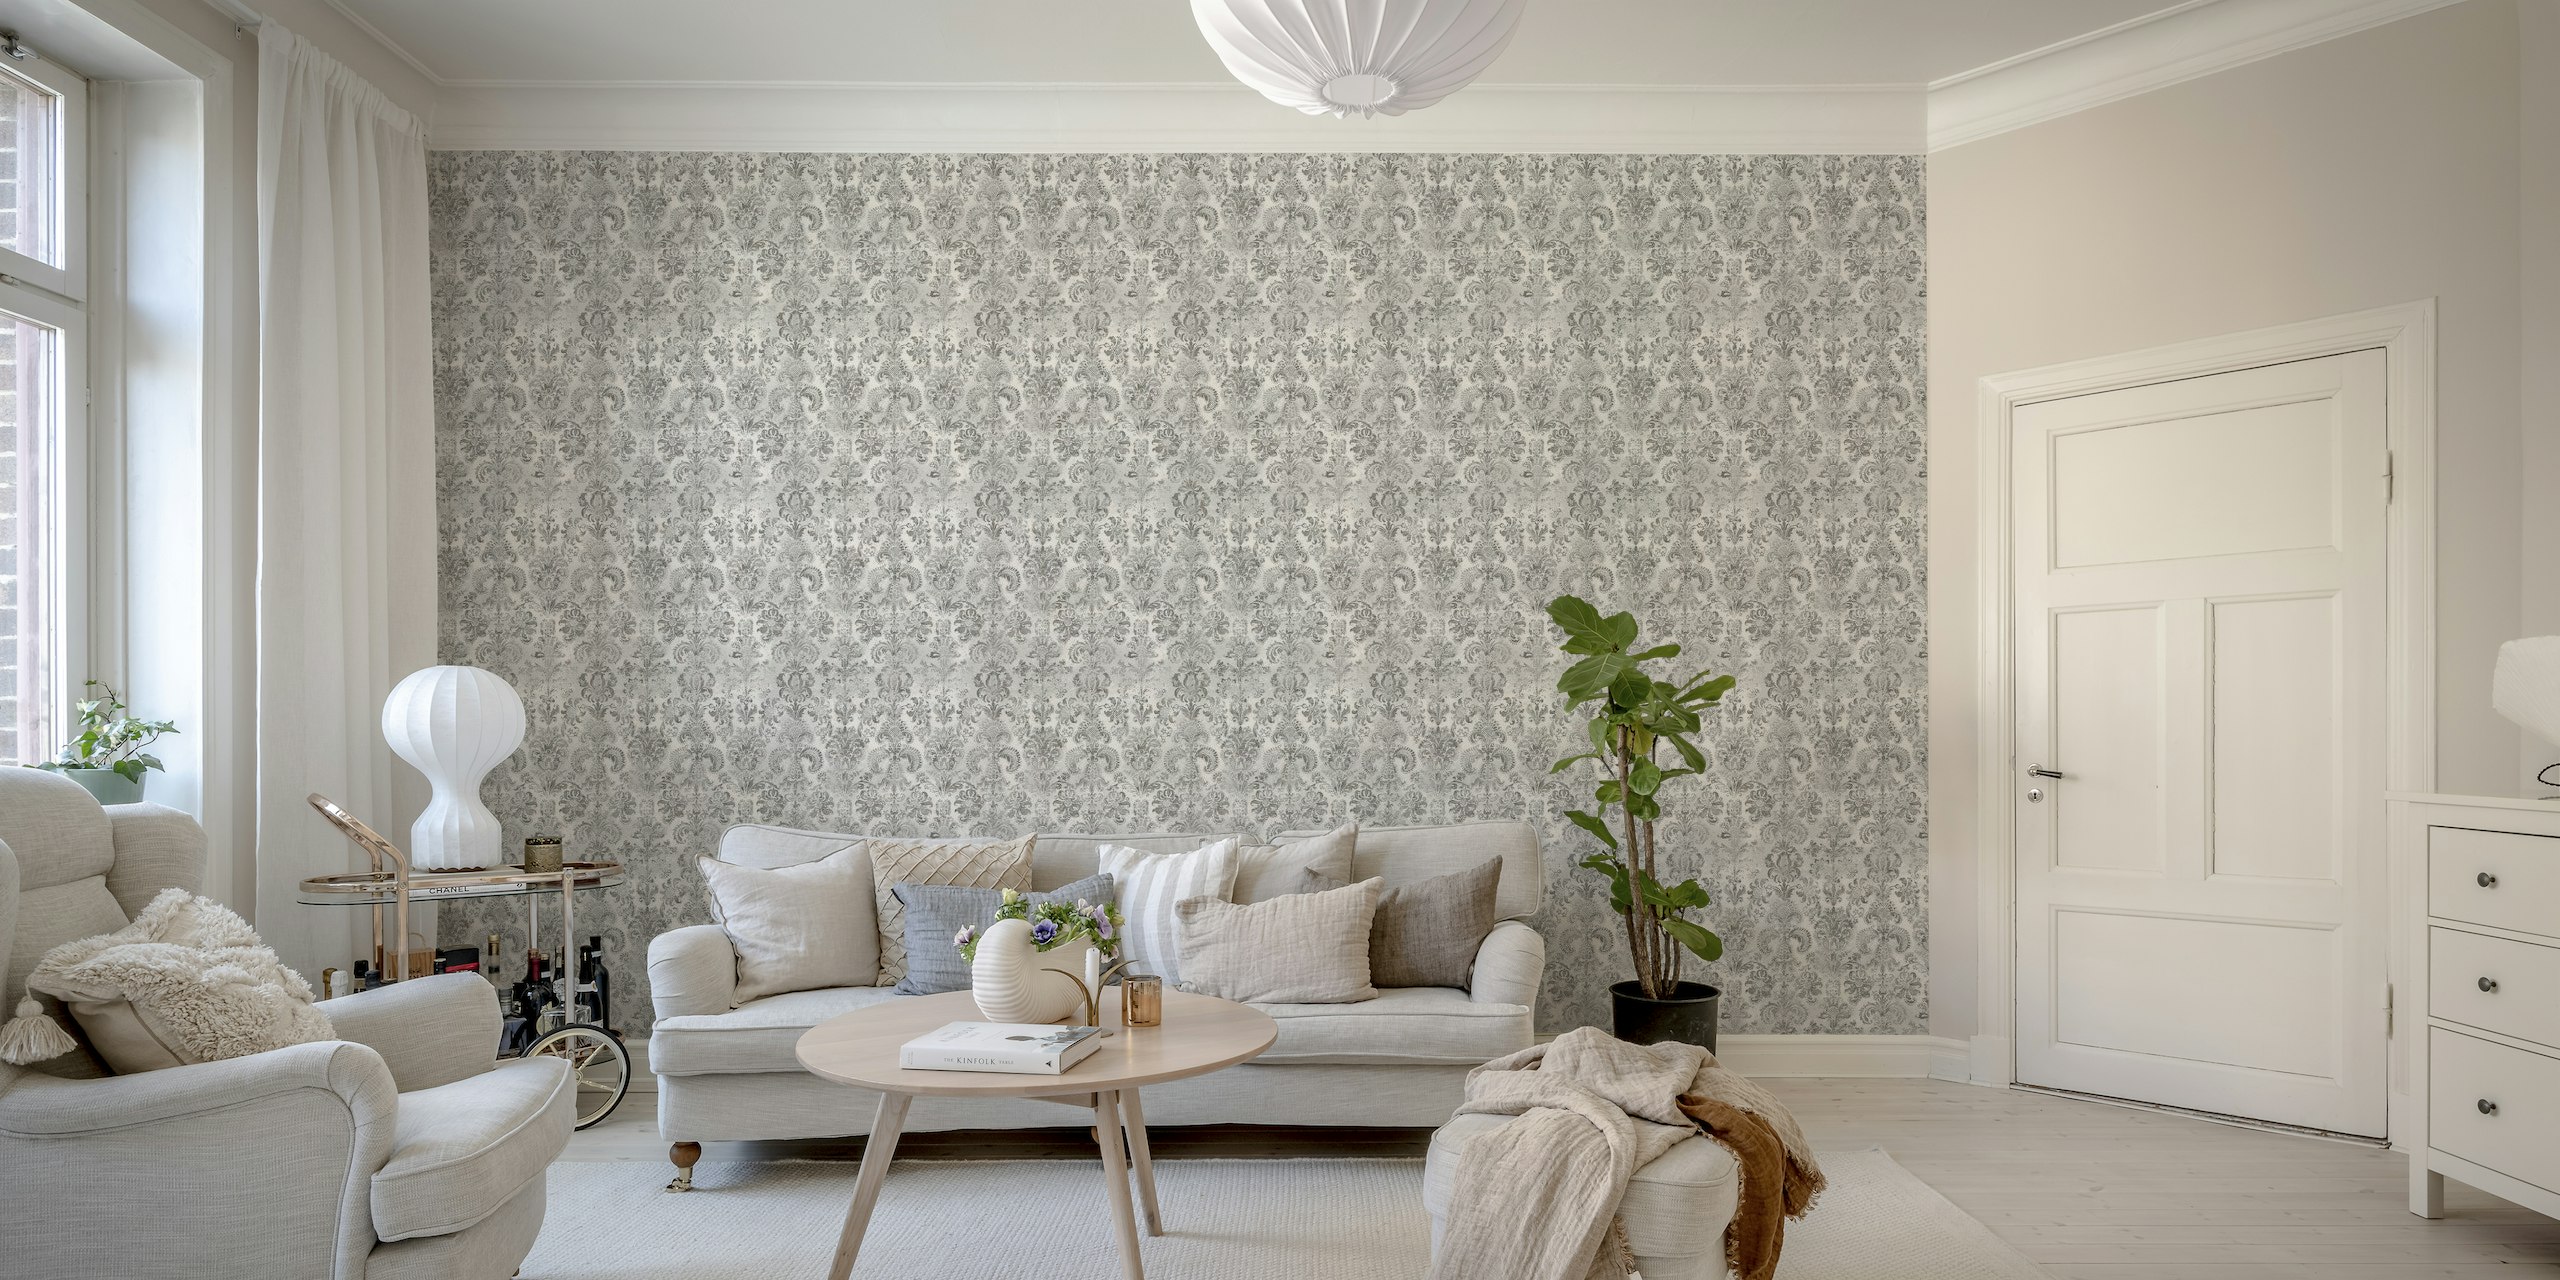 Grunge damask pattern wall mural in shades of cappuccino, grey, and cream